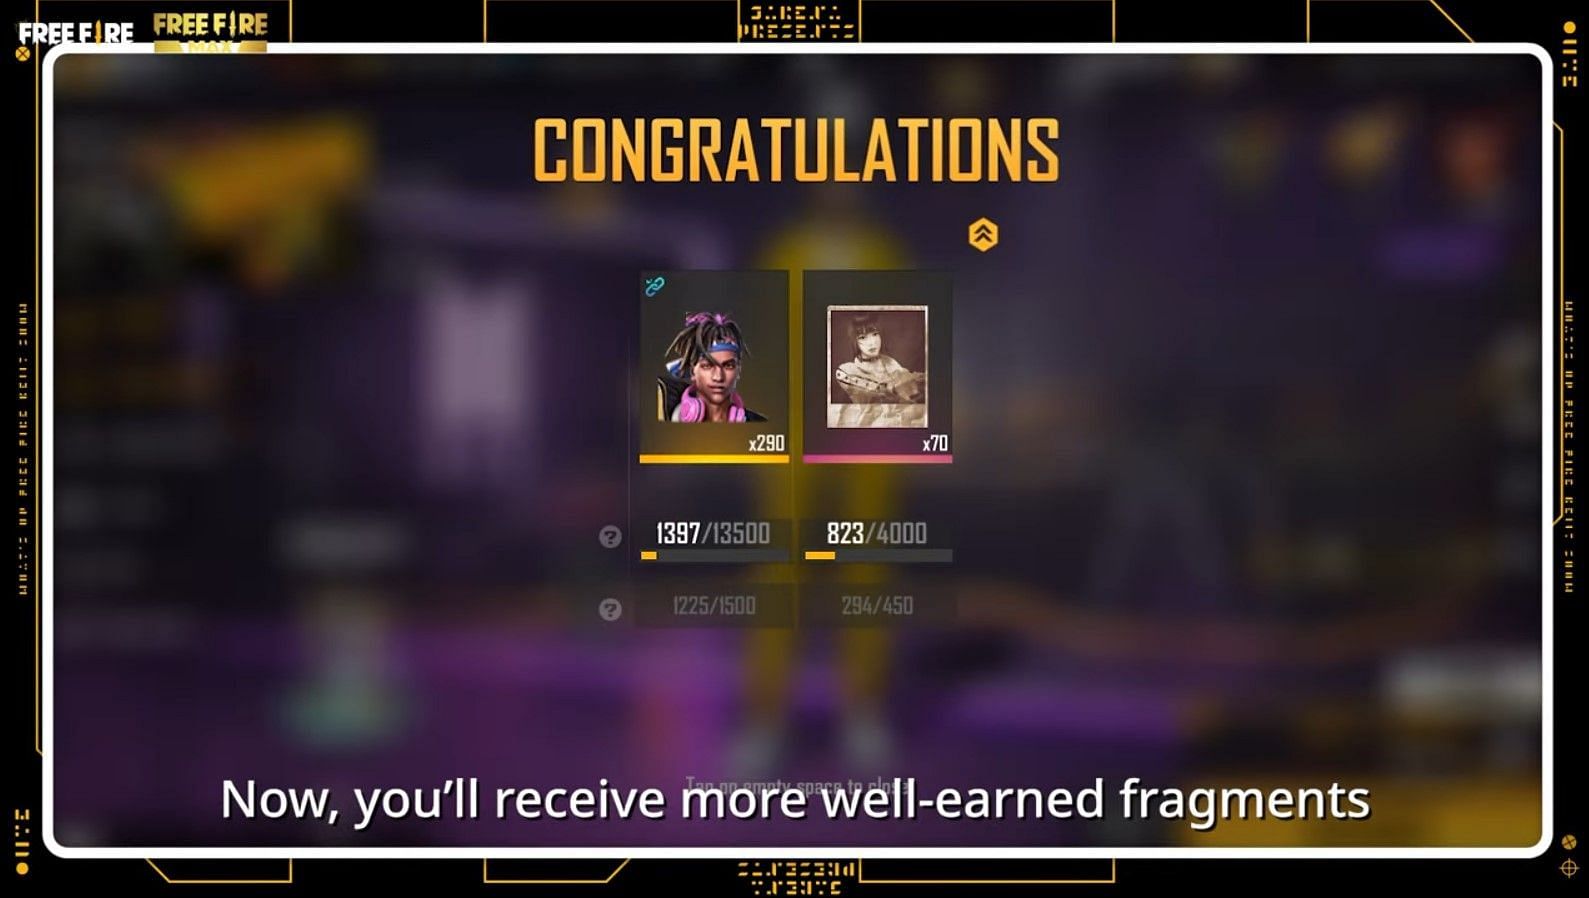 Players will earn more fragments after a match (Image via Garena)